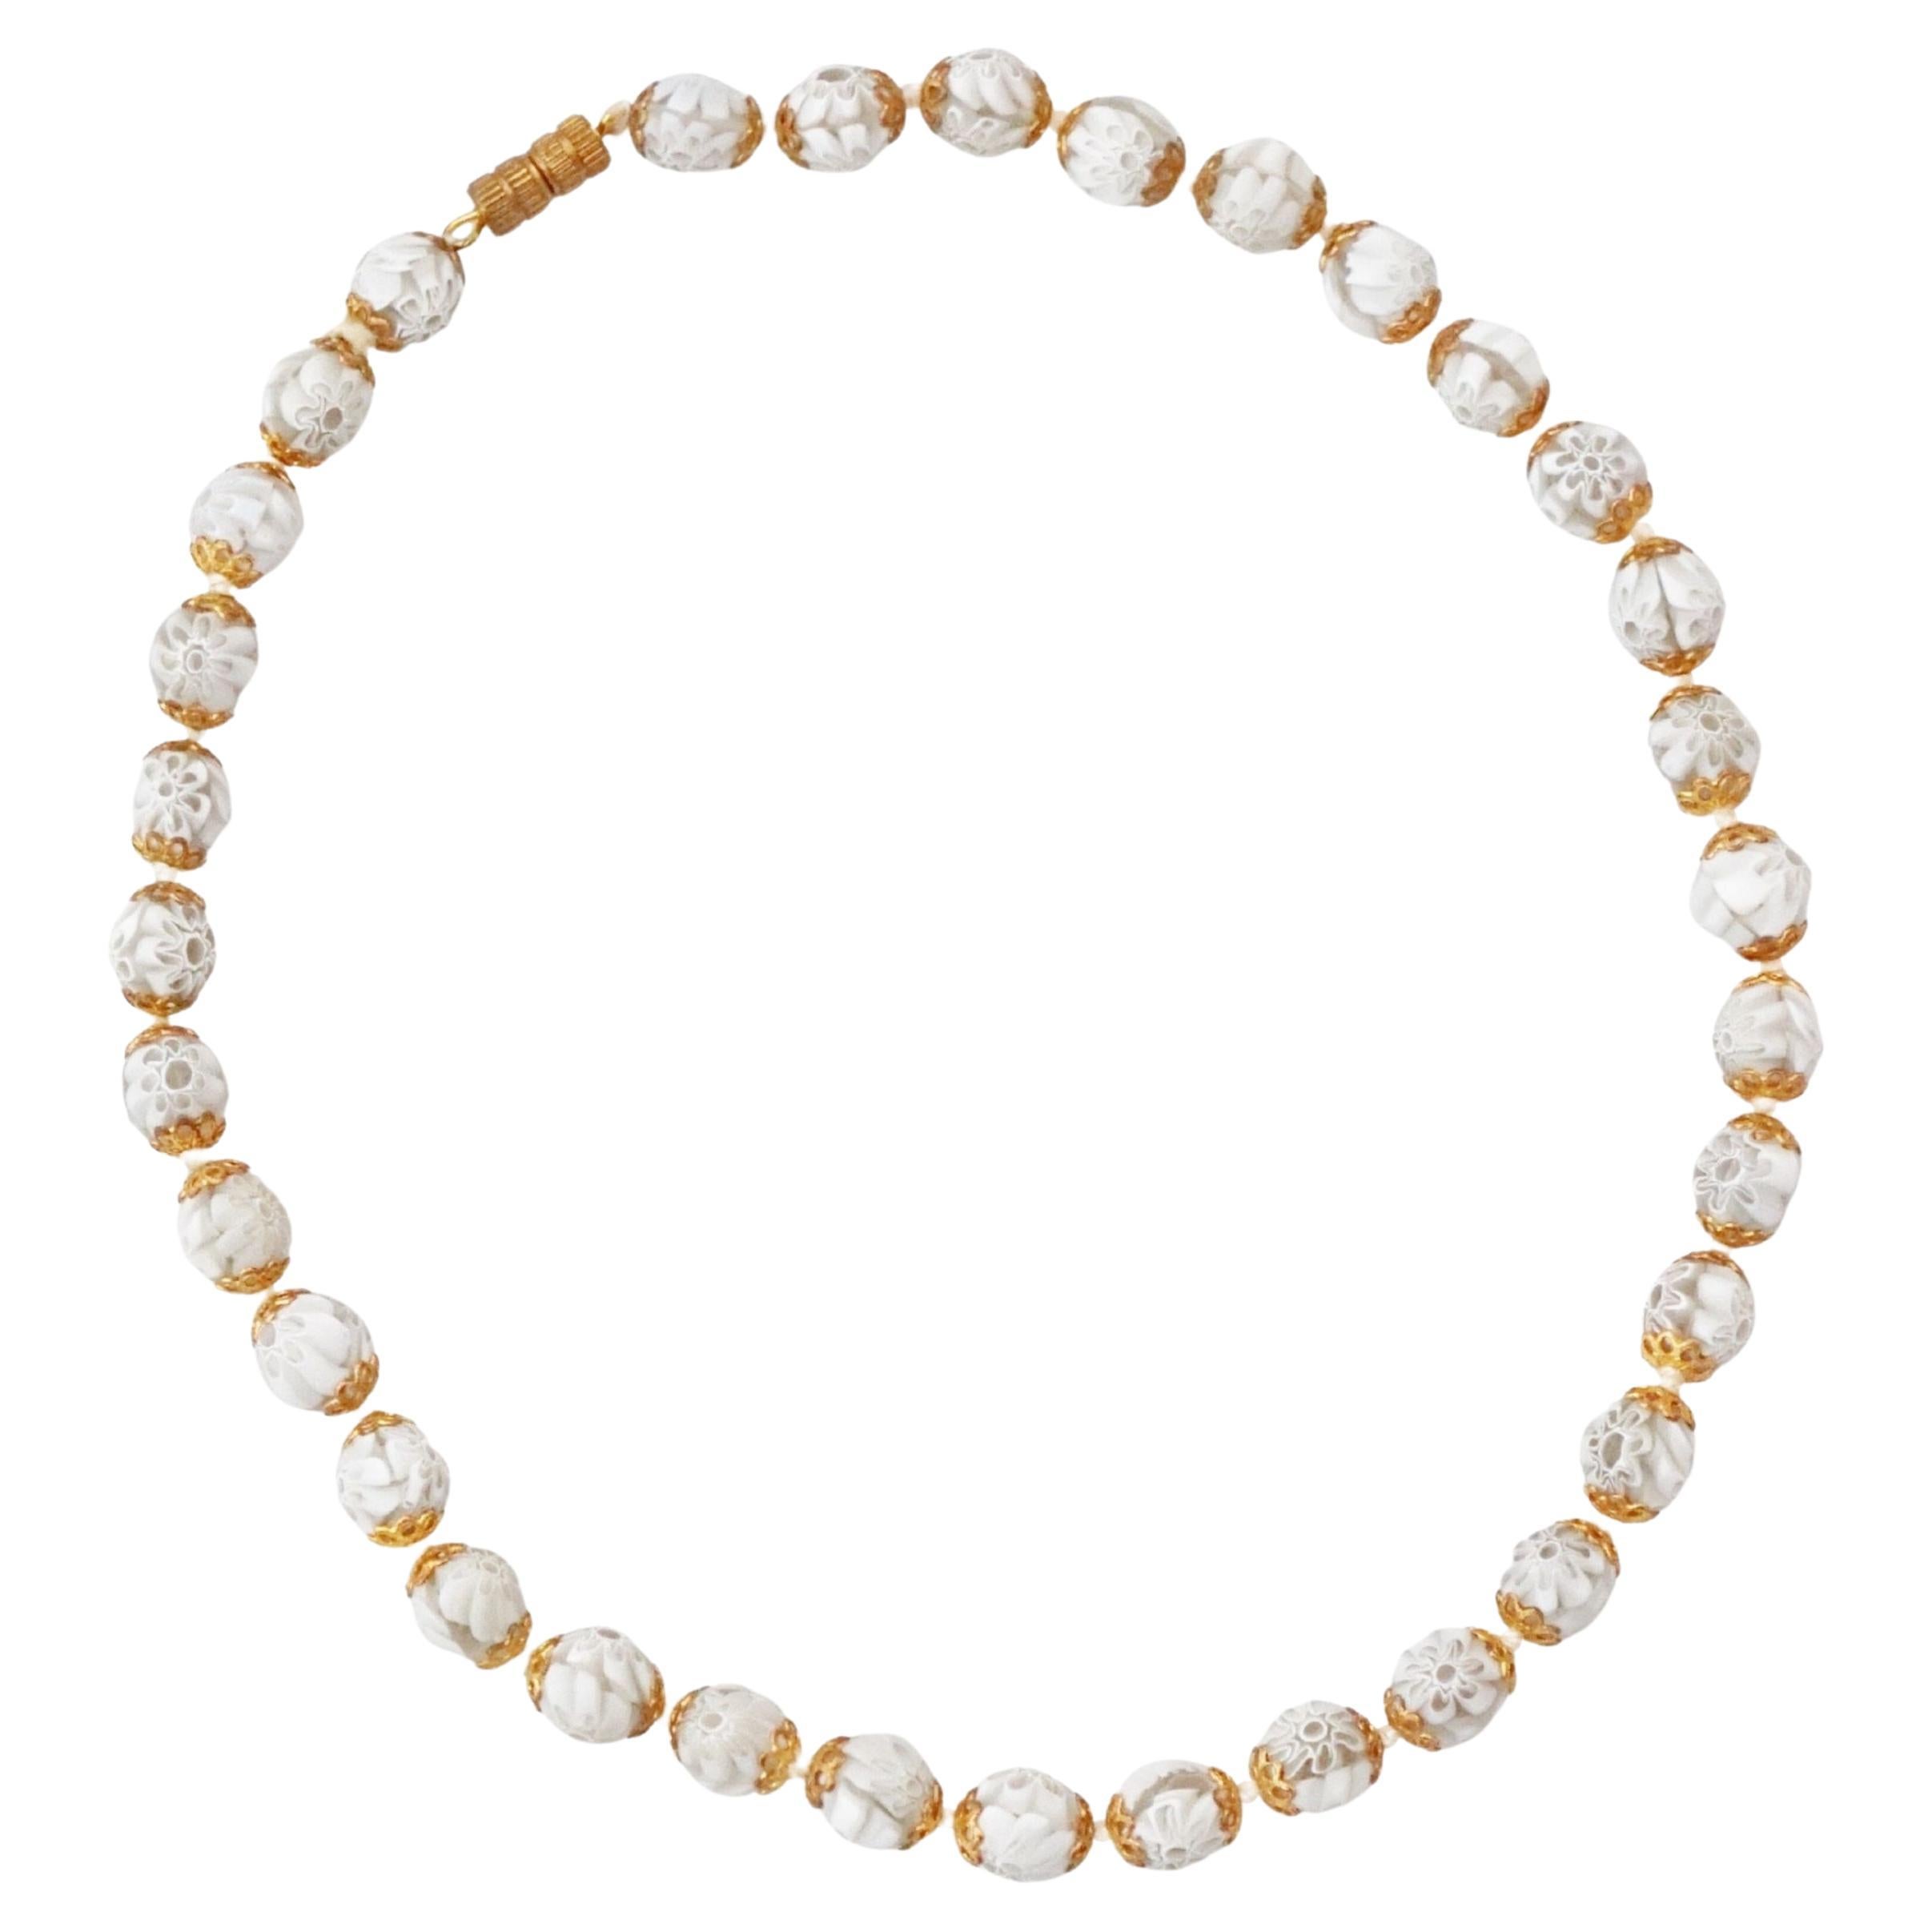 Lacey White Floral Murano Glass Bead Choker Necklace, 1950s For Sale